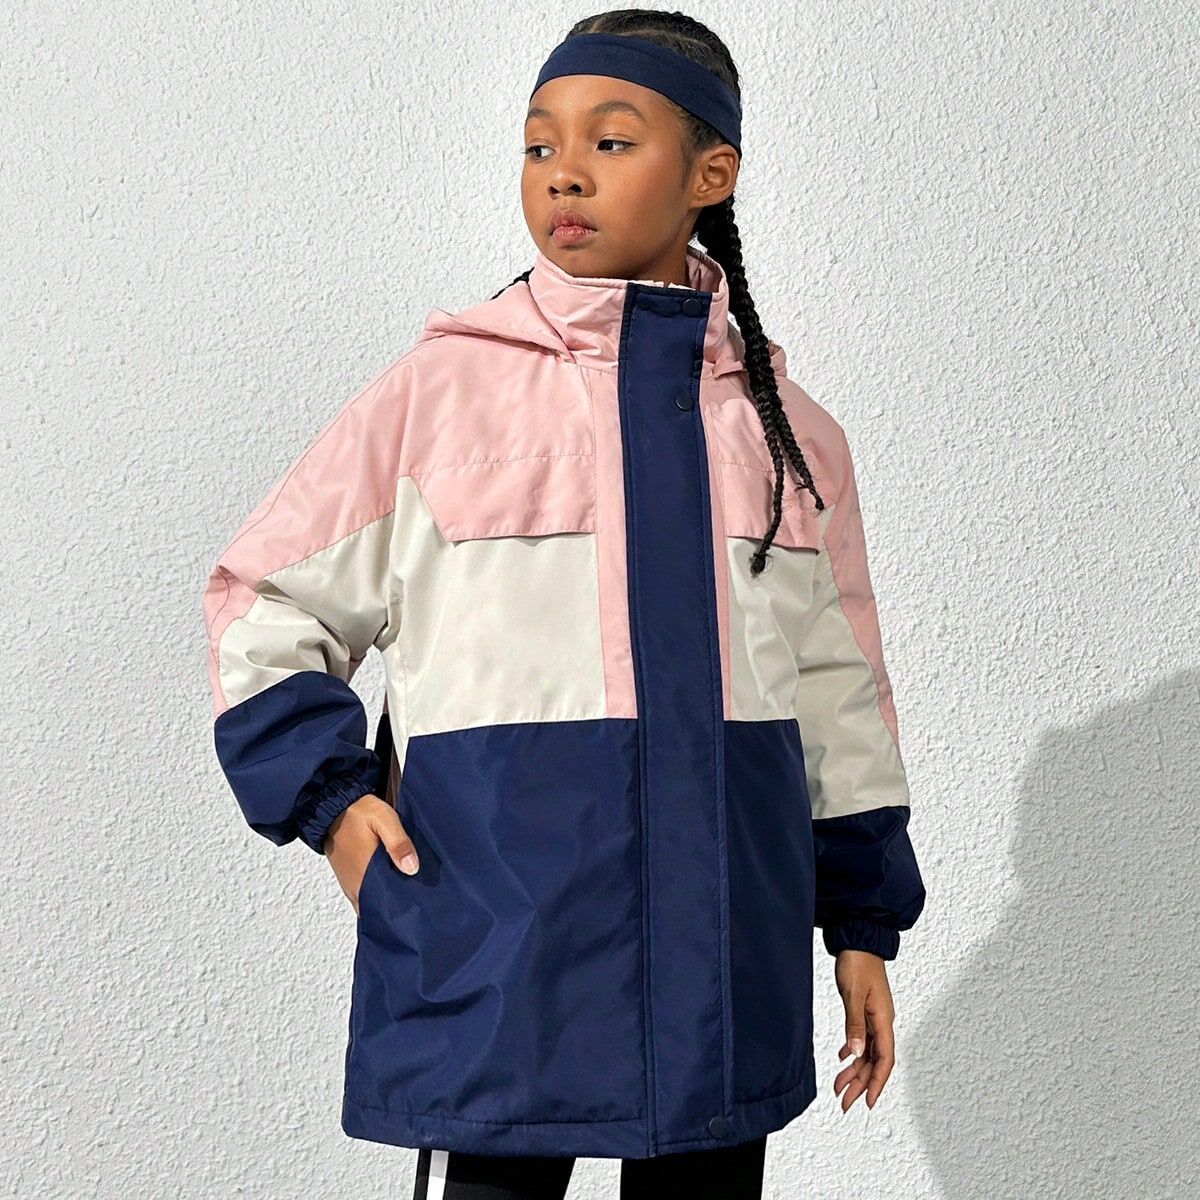 SHEIN Outdoor Sports Jacket For Tween Girls, Three Tone Blue Pink And White Colorblock, Mid-length Padded Coat, Windproof, Waterproof, Thermal, Fashionable, Suitable For Mountaineering, Hiking, Daily And City Commuting Use. Pink 8Y,9Y,10Y,11Y,12Y Girls